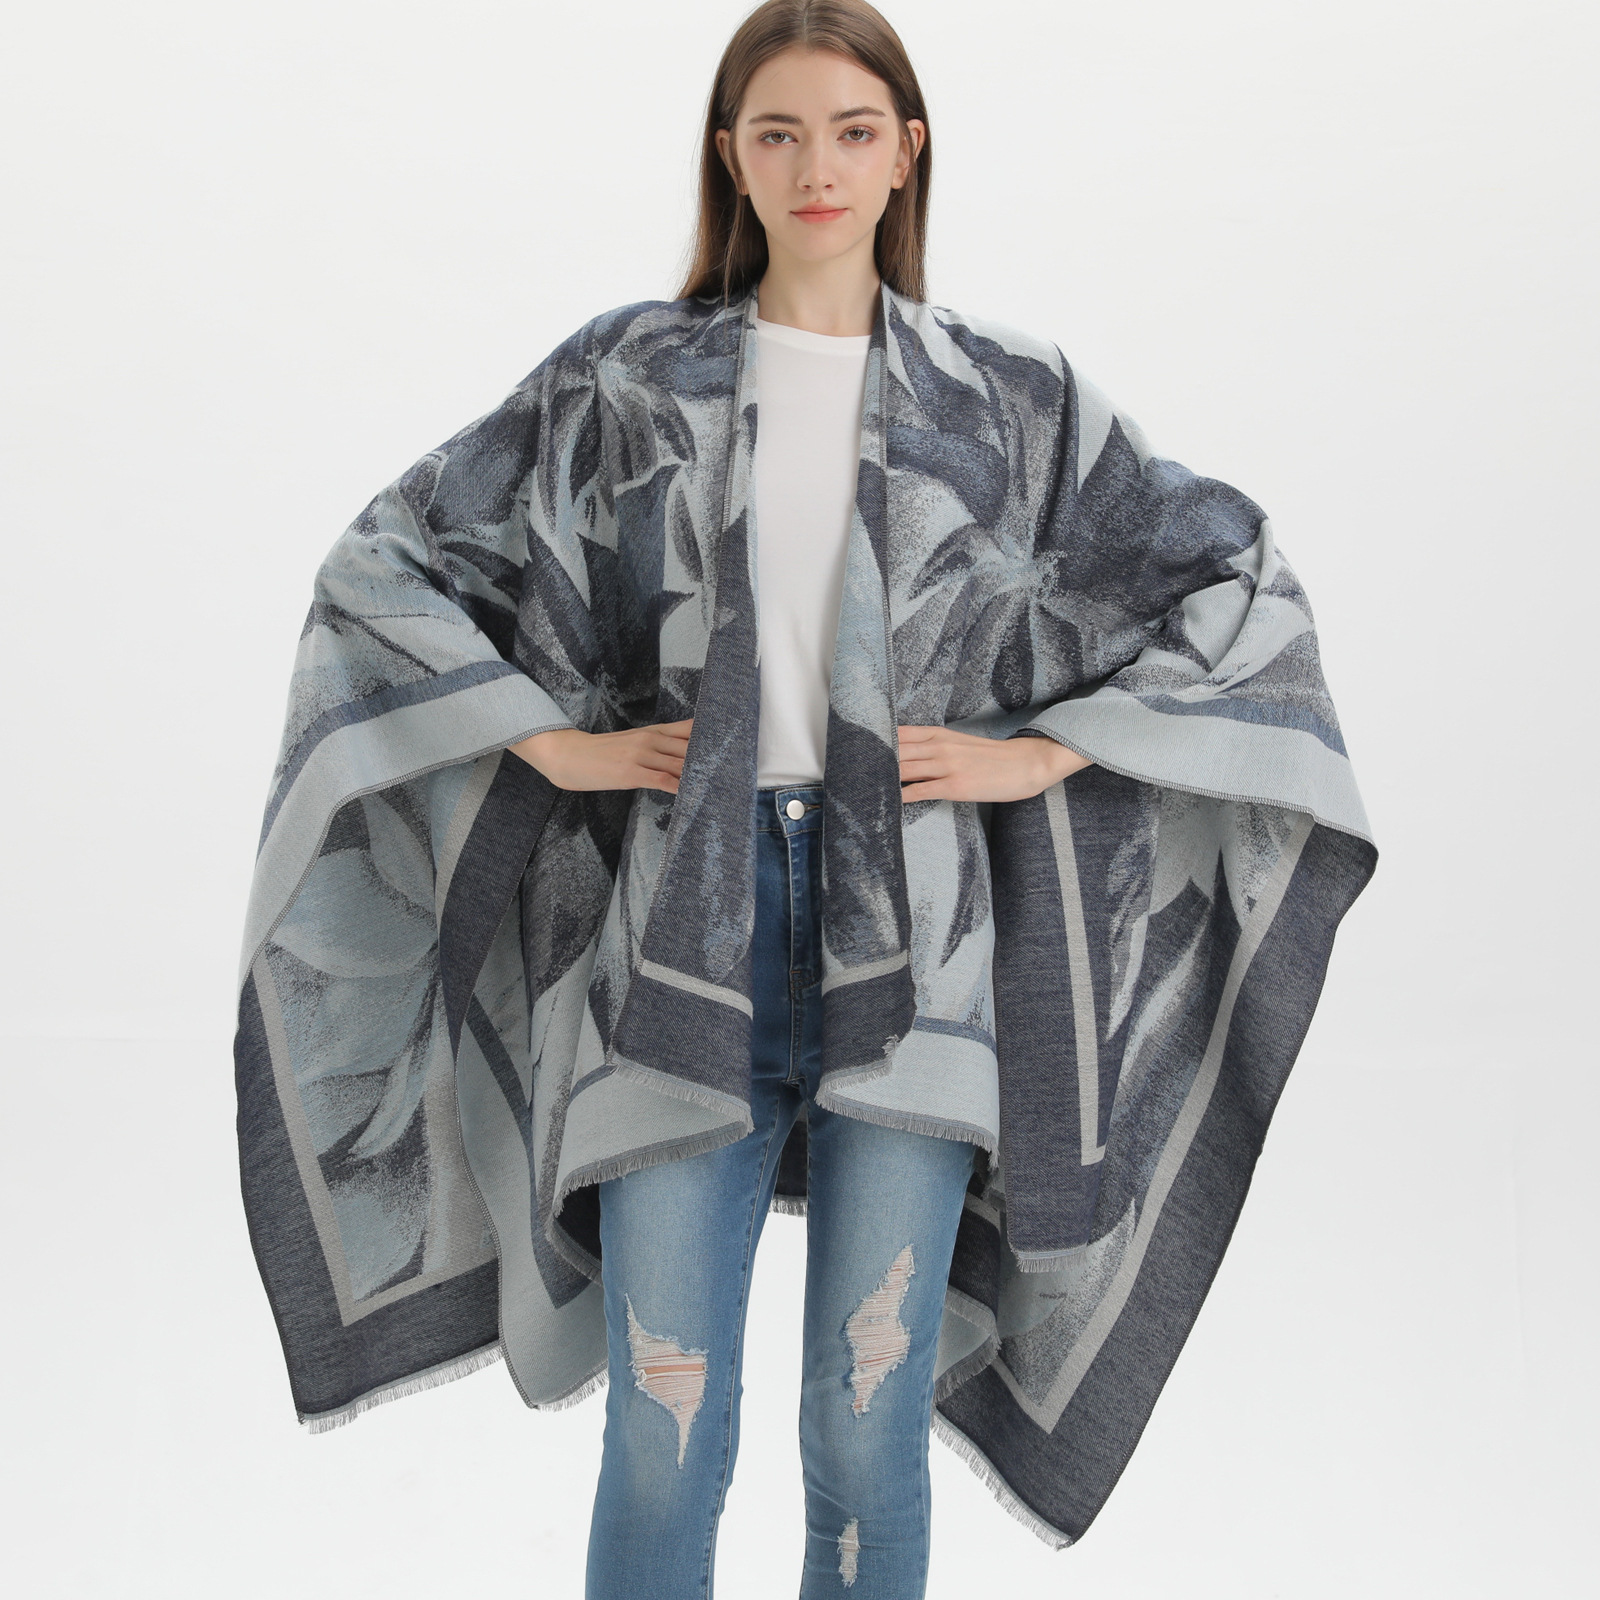 2023 new national style women‘s double-sided scarf shawl four seasons air-conditioned room warm travel all-matching outerwear cloak